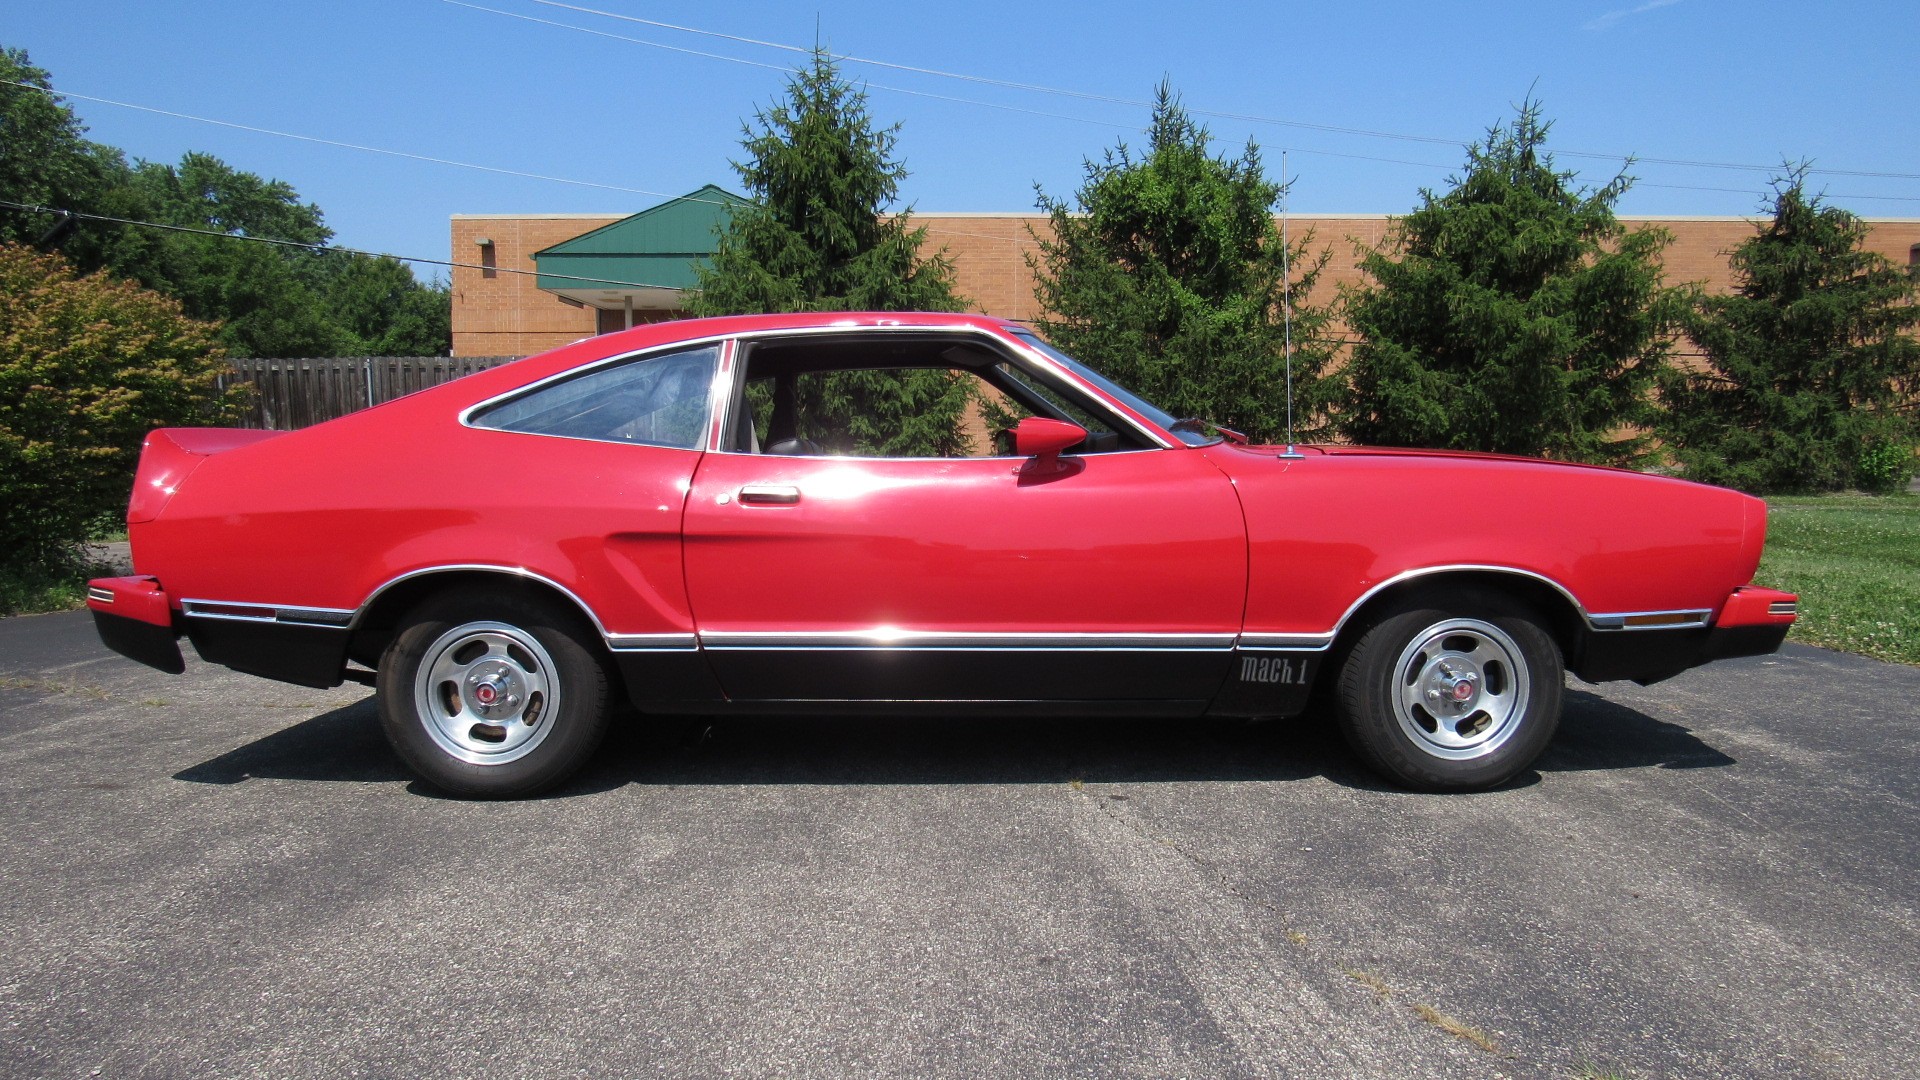 1978 Mustang Mach 1, Auto, SOLD!